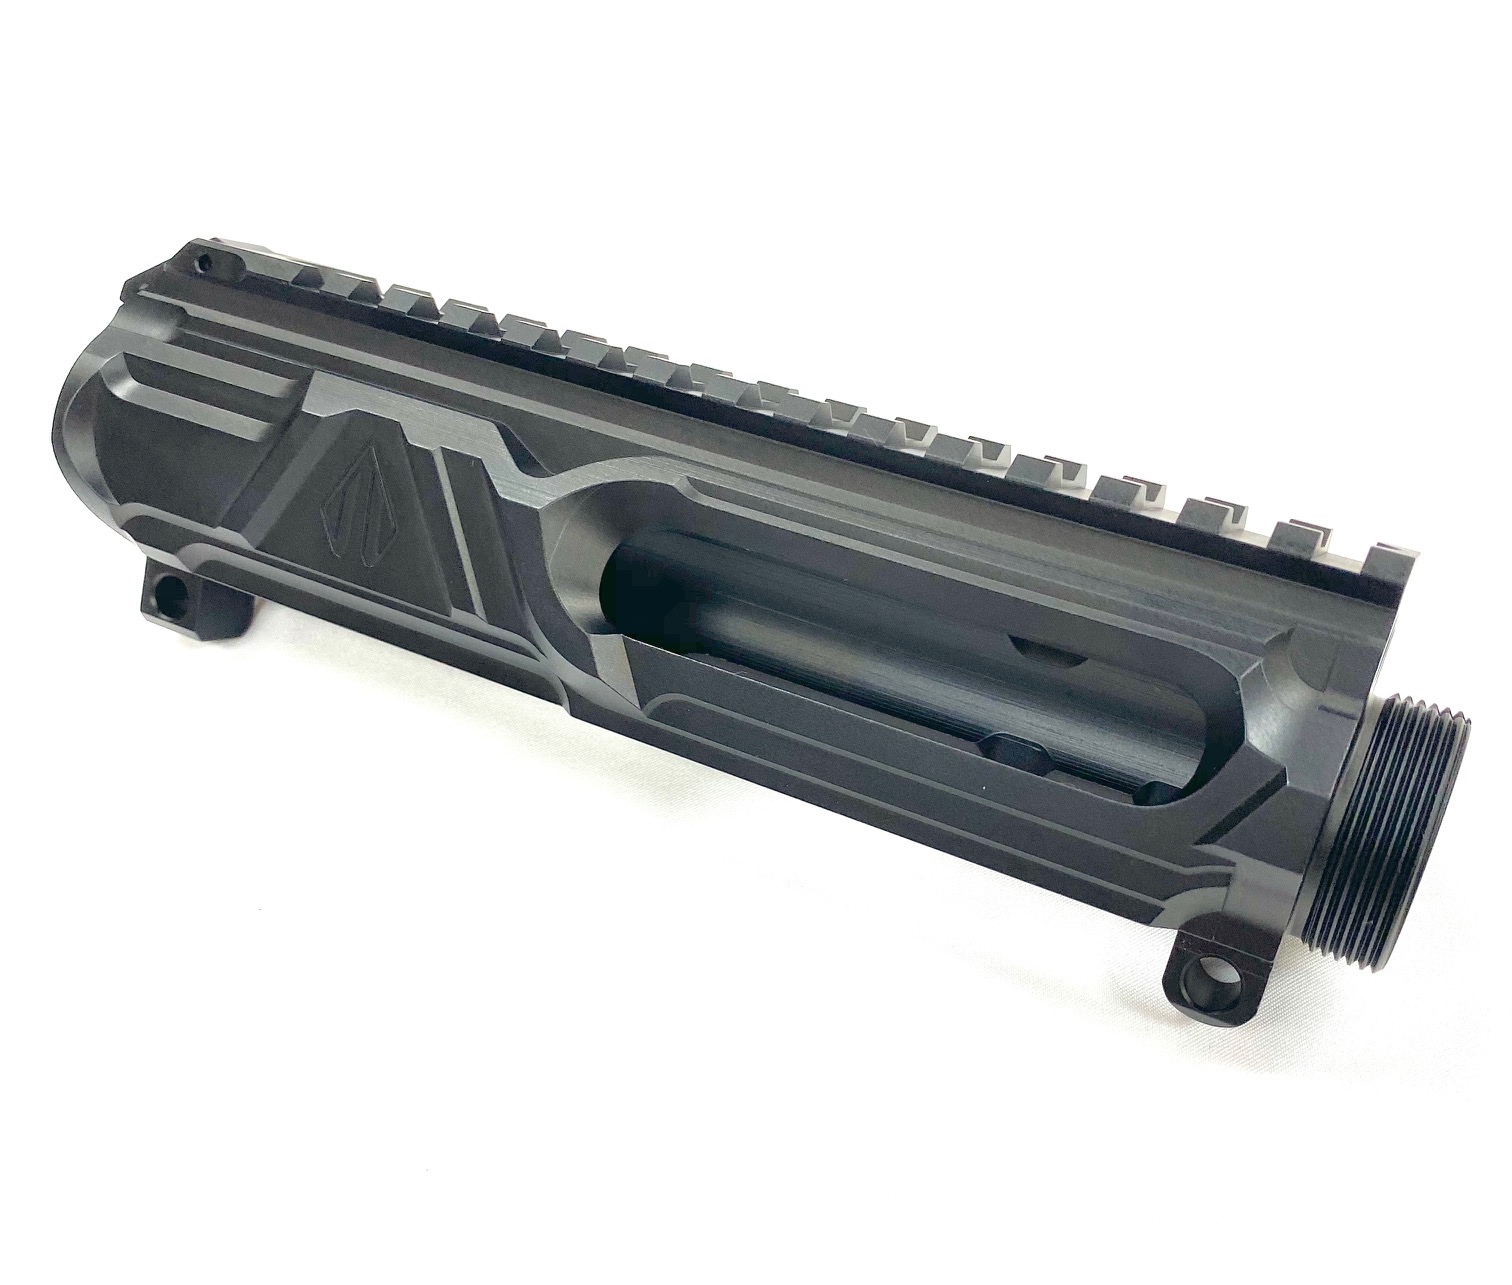 Related image of G4 Left Handed Side Charging Upper Receiver Enlarged Eject...